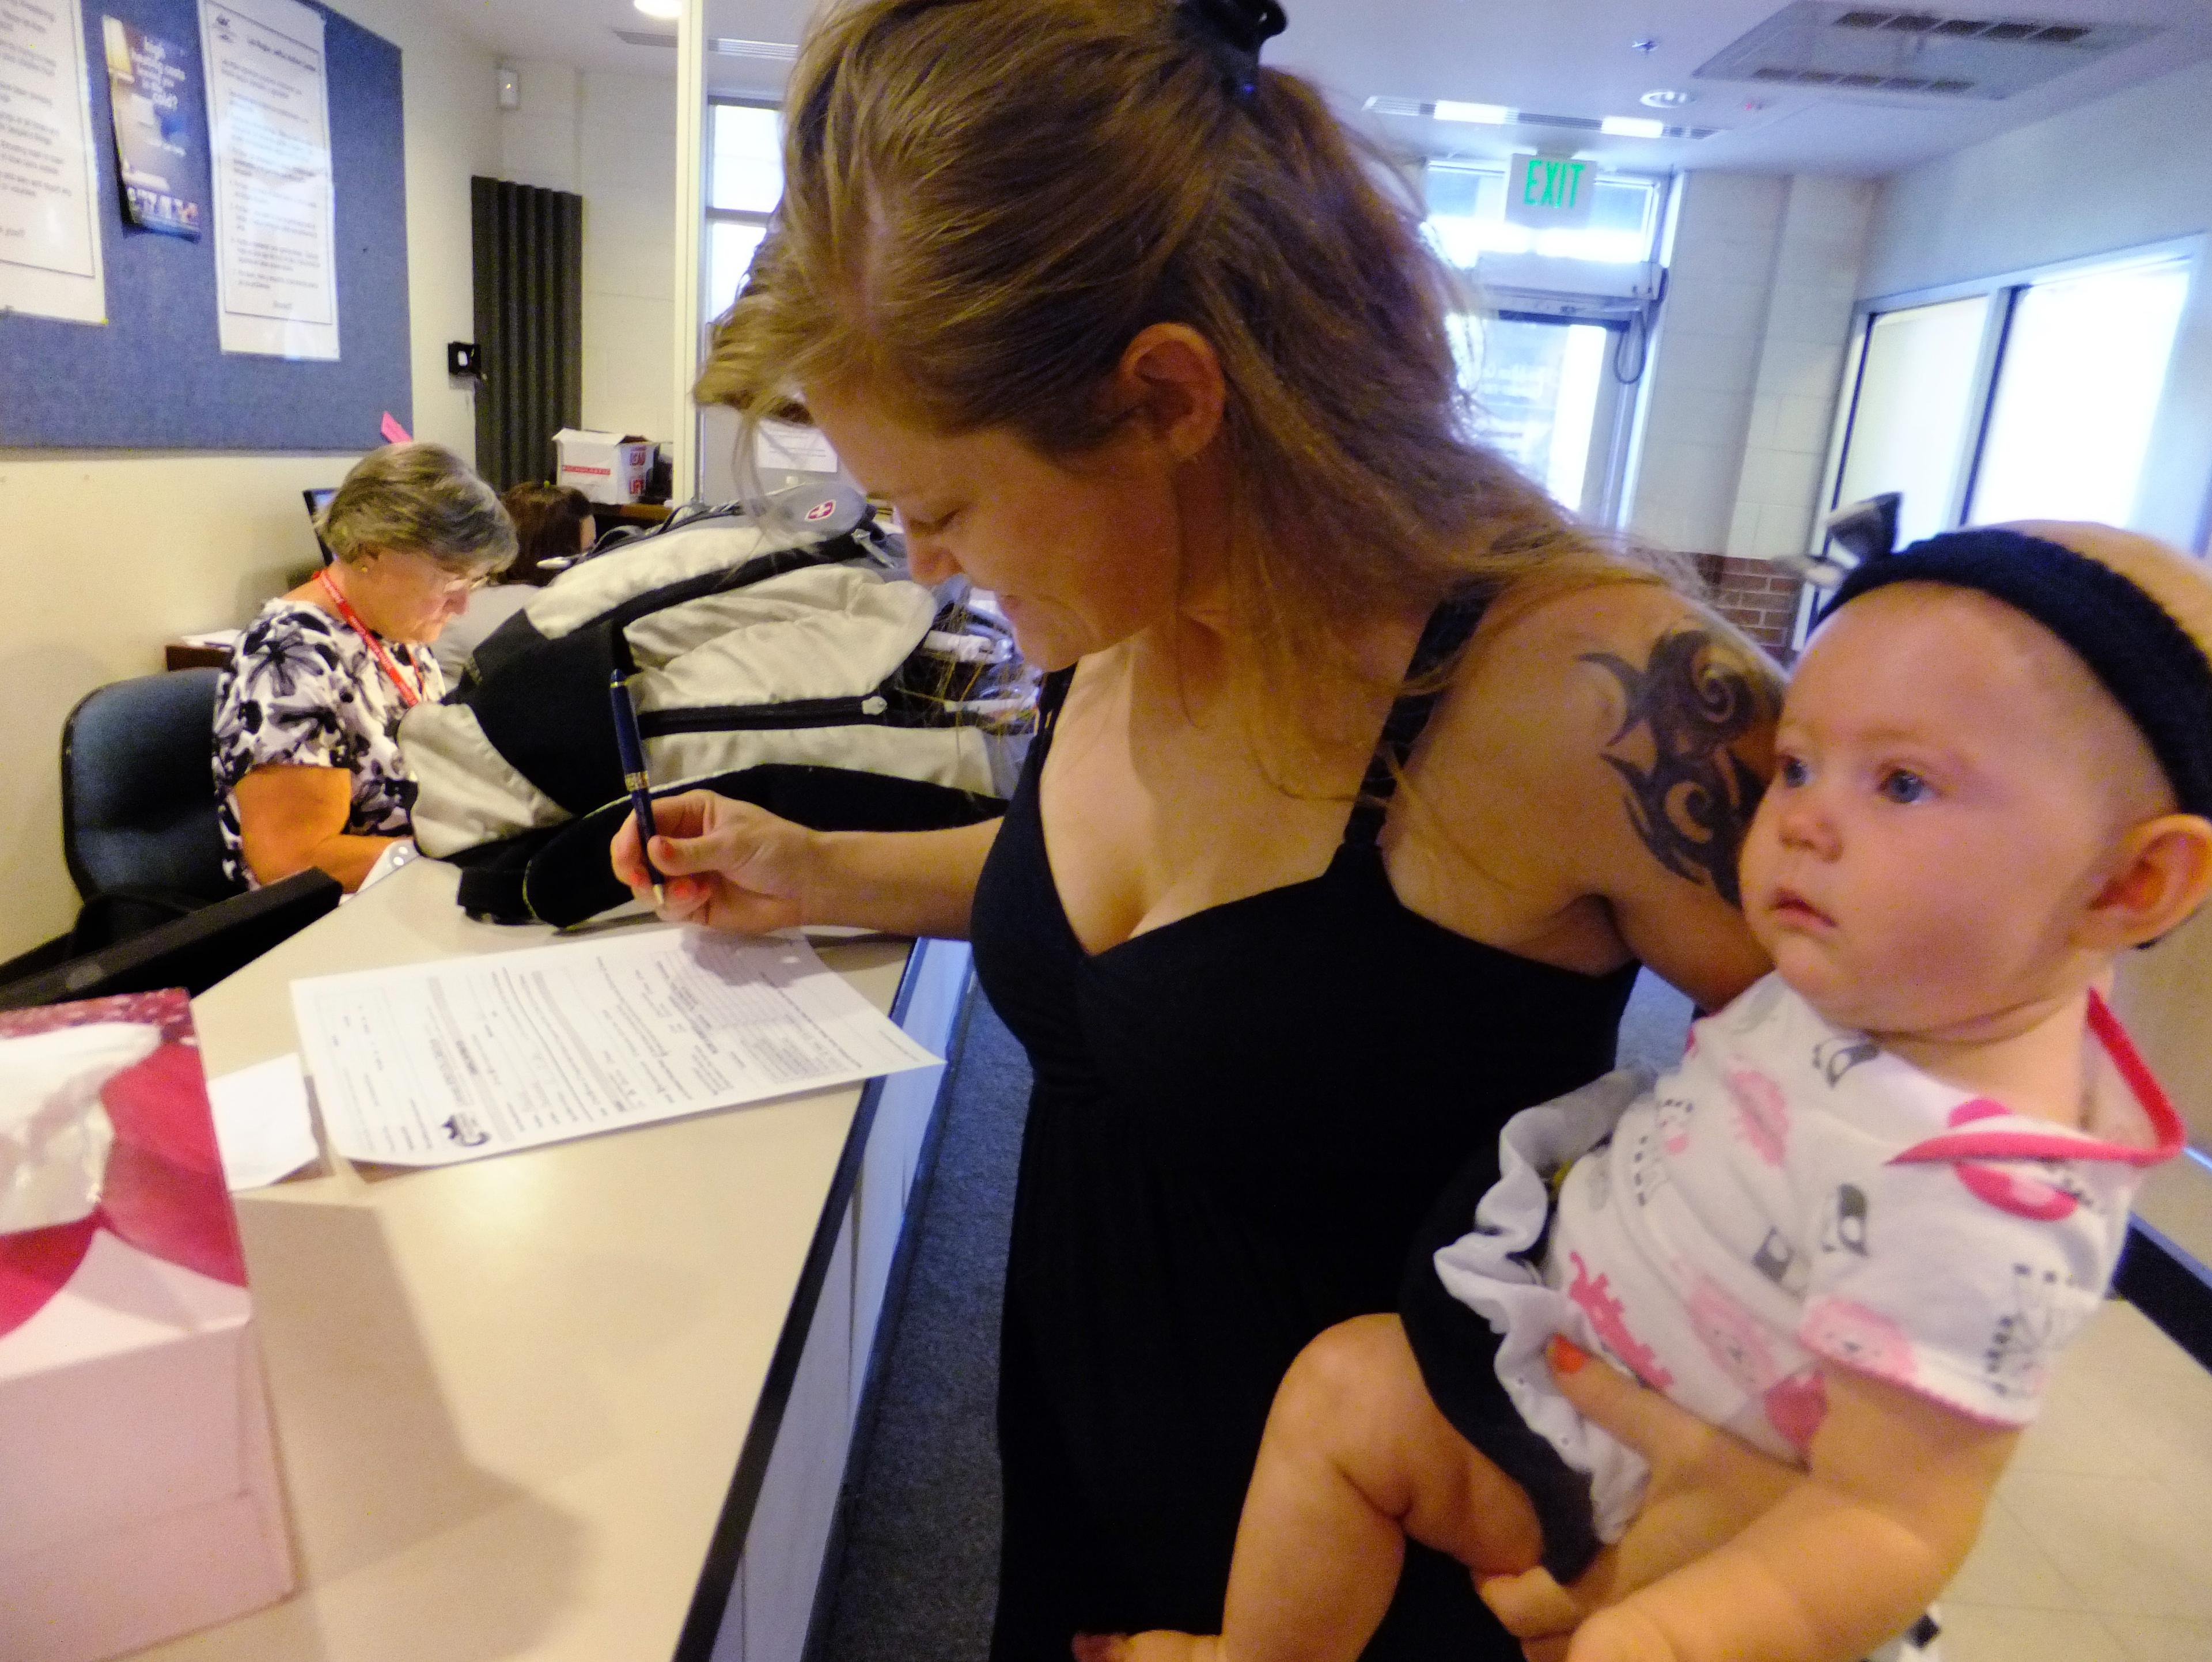 Photo: Mother with daughter at assistance center (AP Photo)